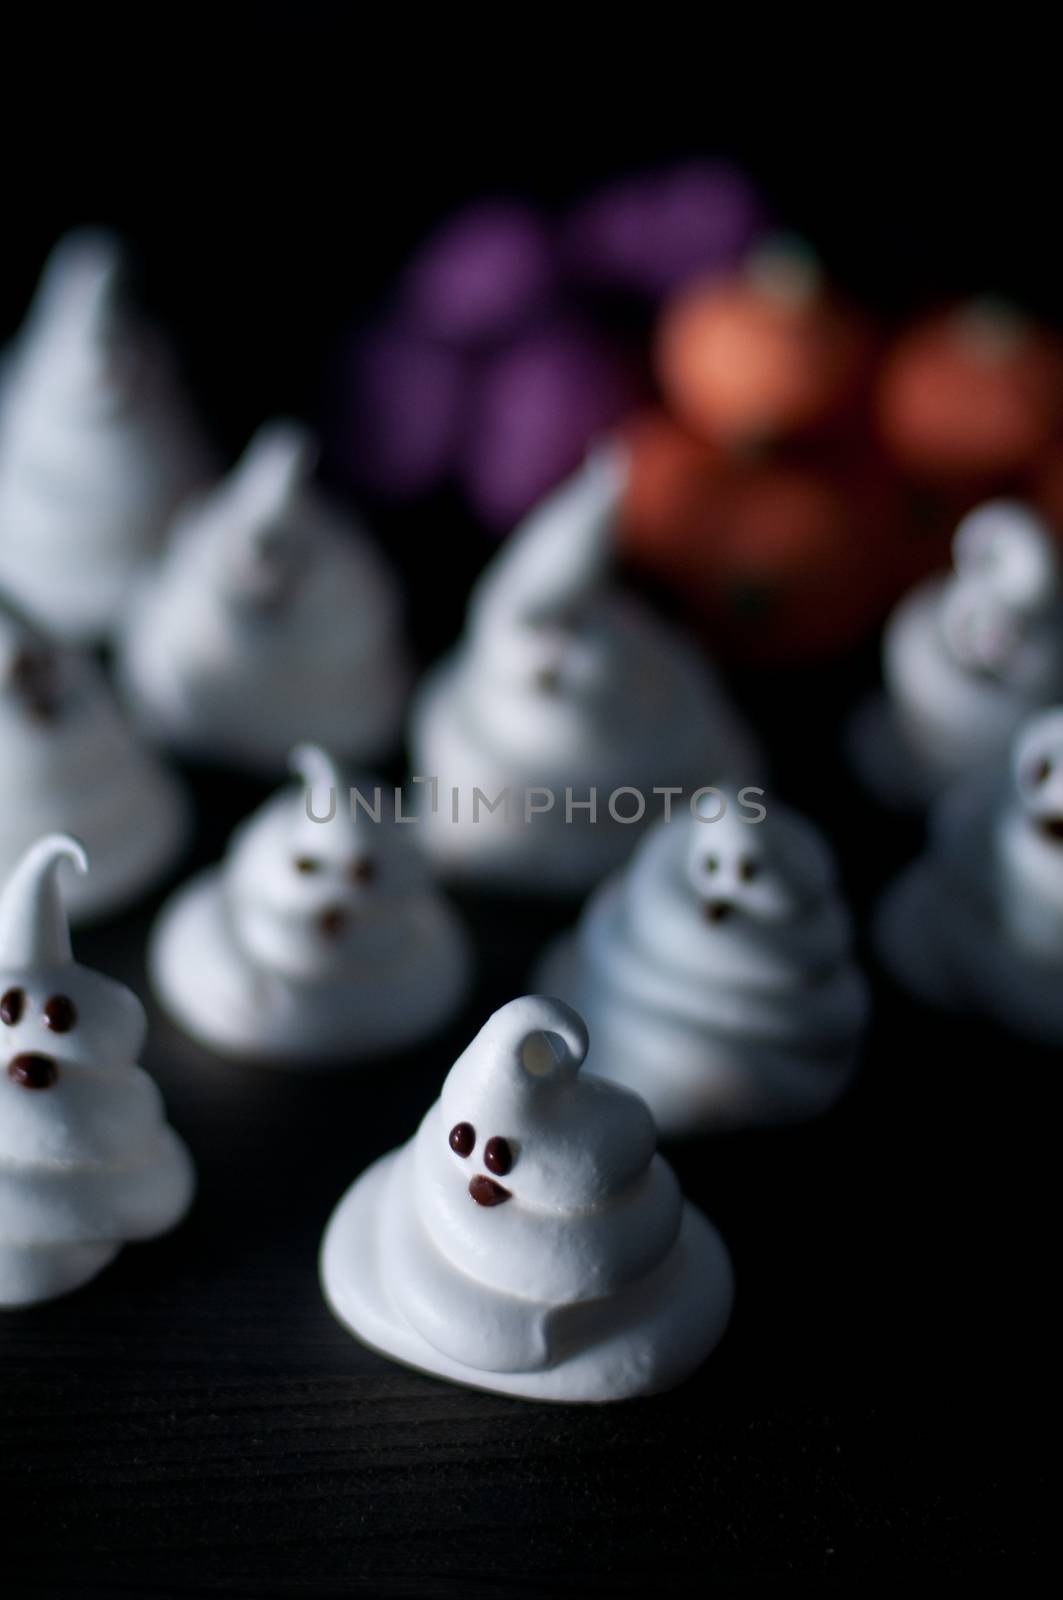 Ghosts of sugar and eggs for halloween